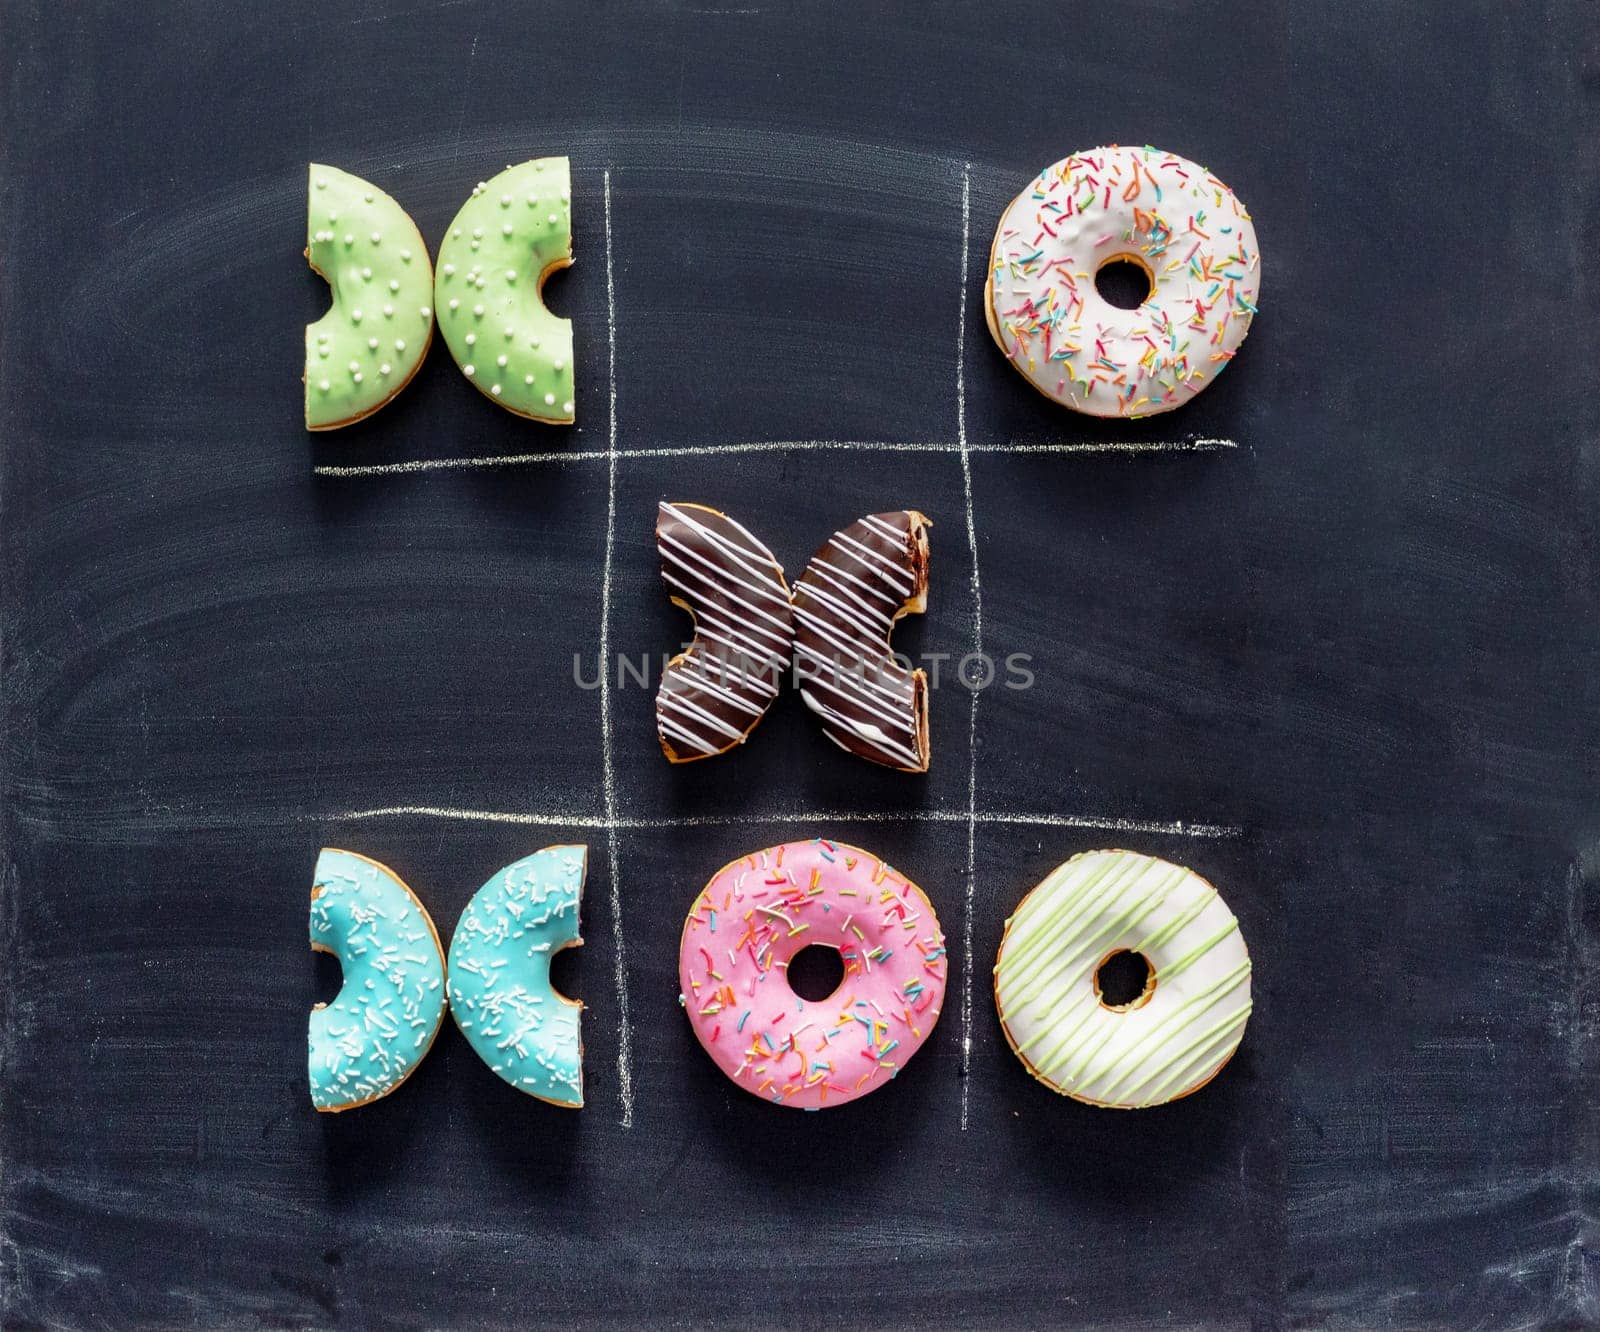 Tic tac toe made of donuts. Game noughts and crosses with donuts on chalkboard. Unhealthy diet, diabetes, sugar concept. Top view or flat lay.